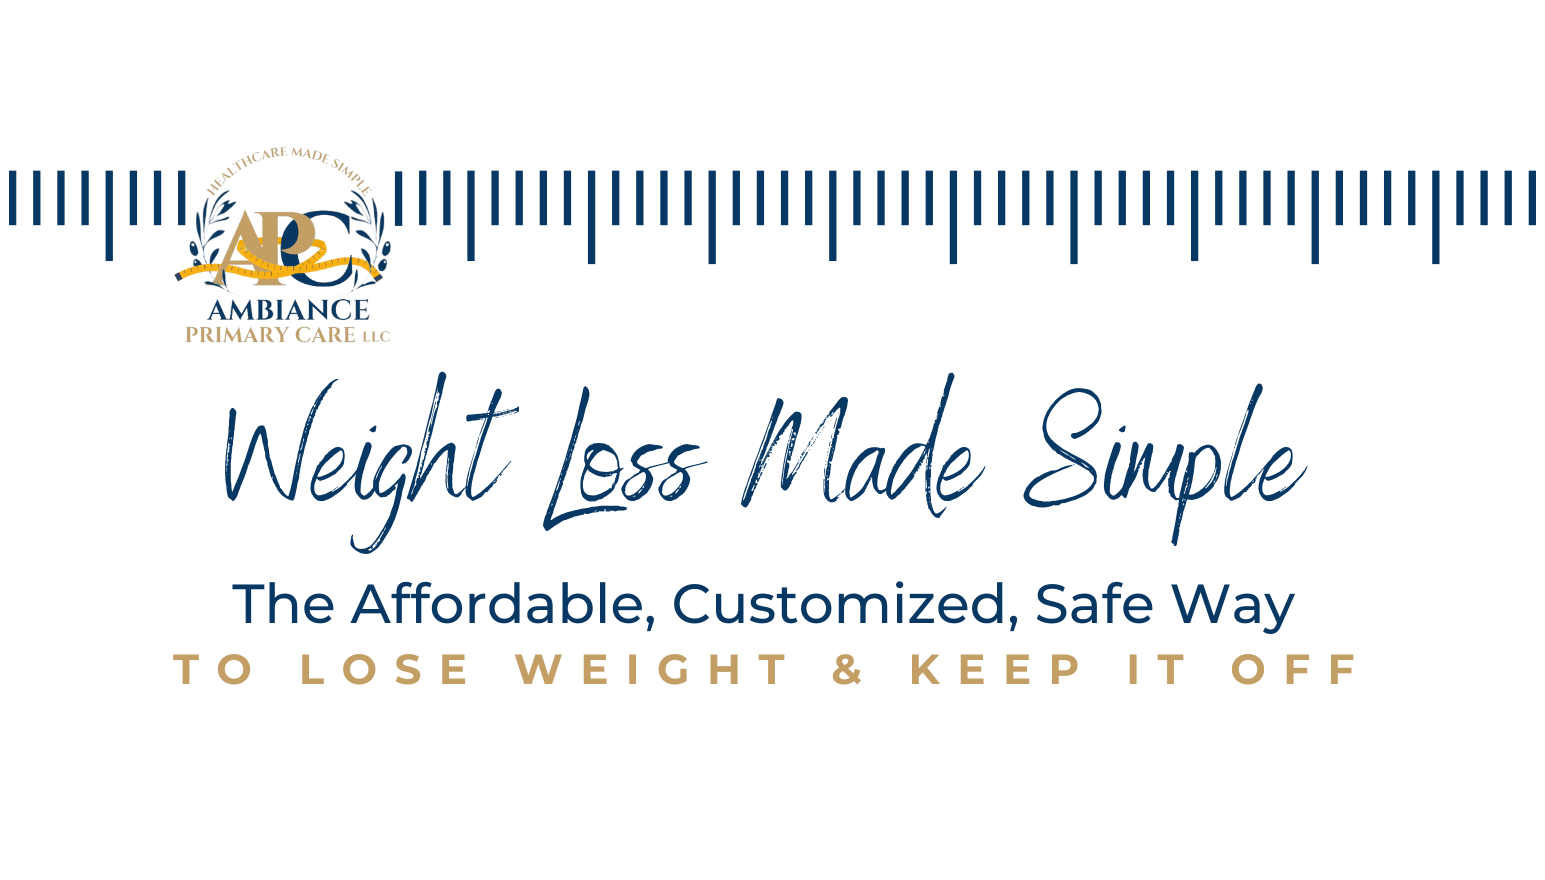 Weight Loss Made Simple